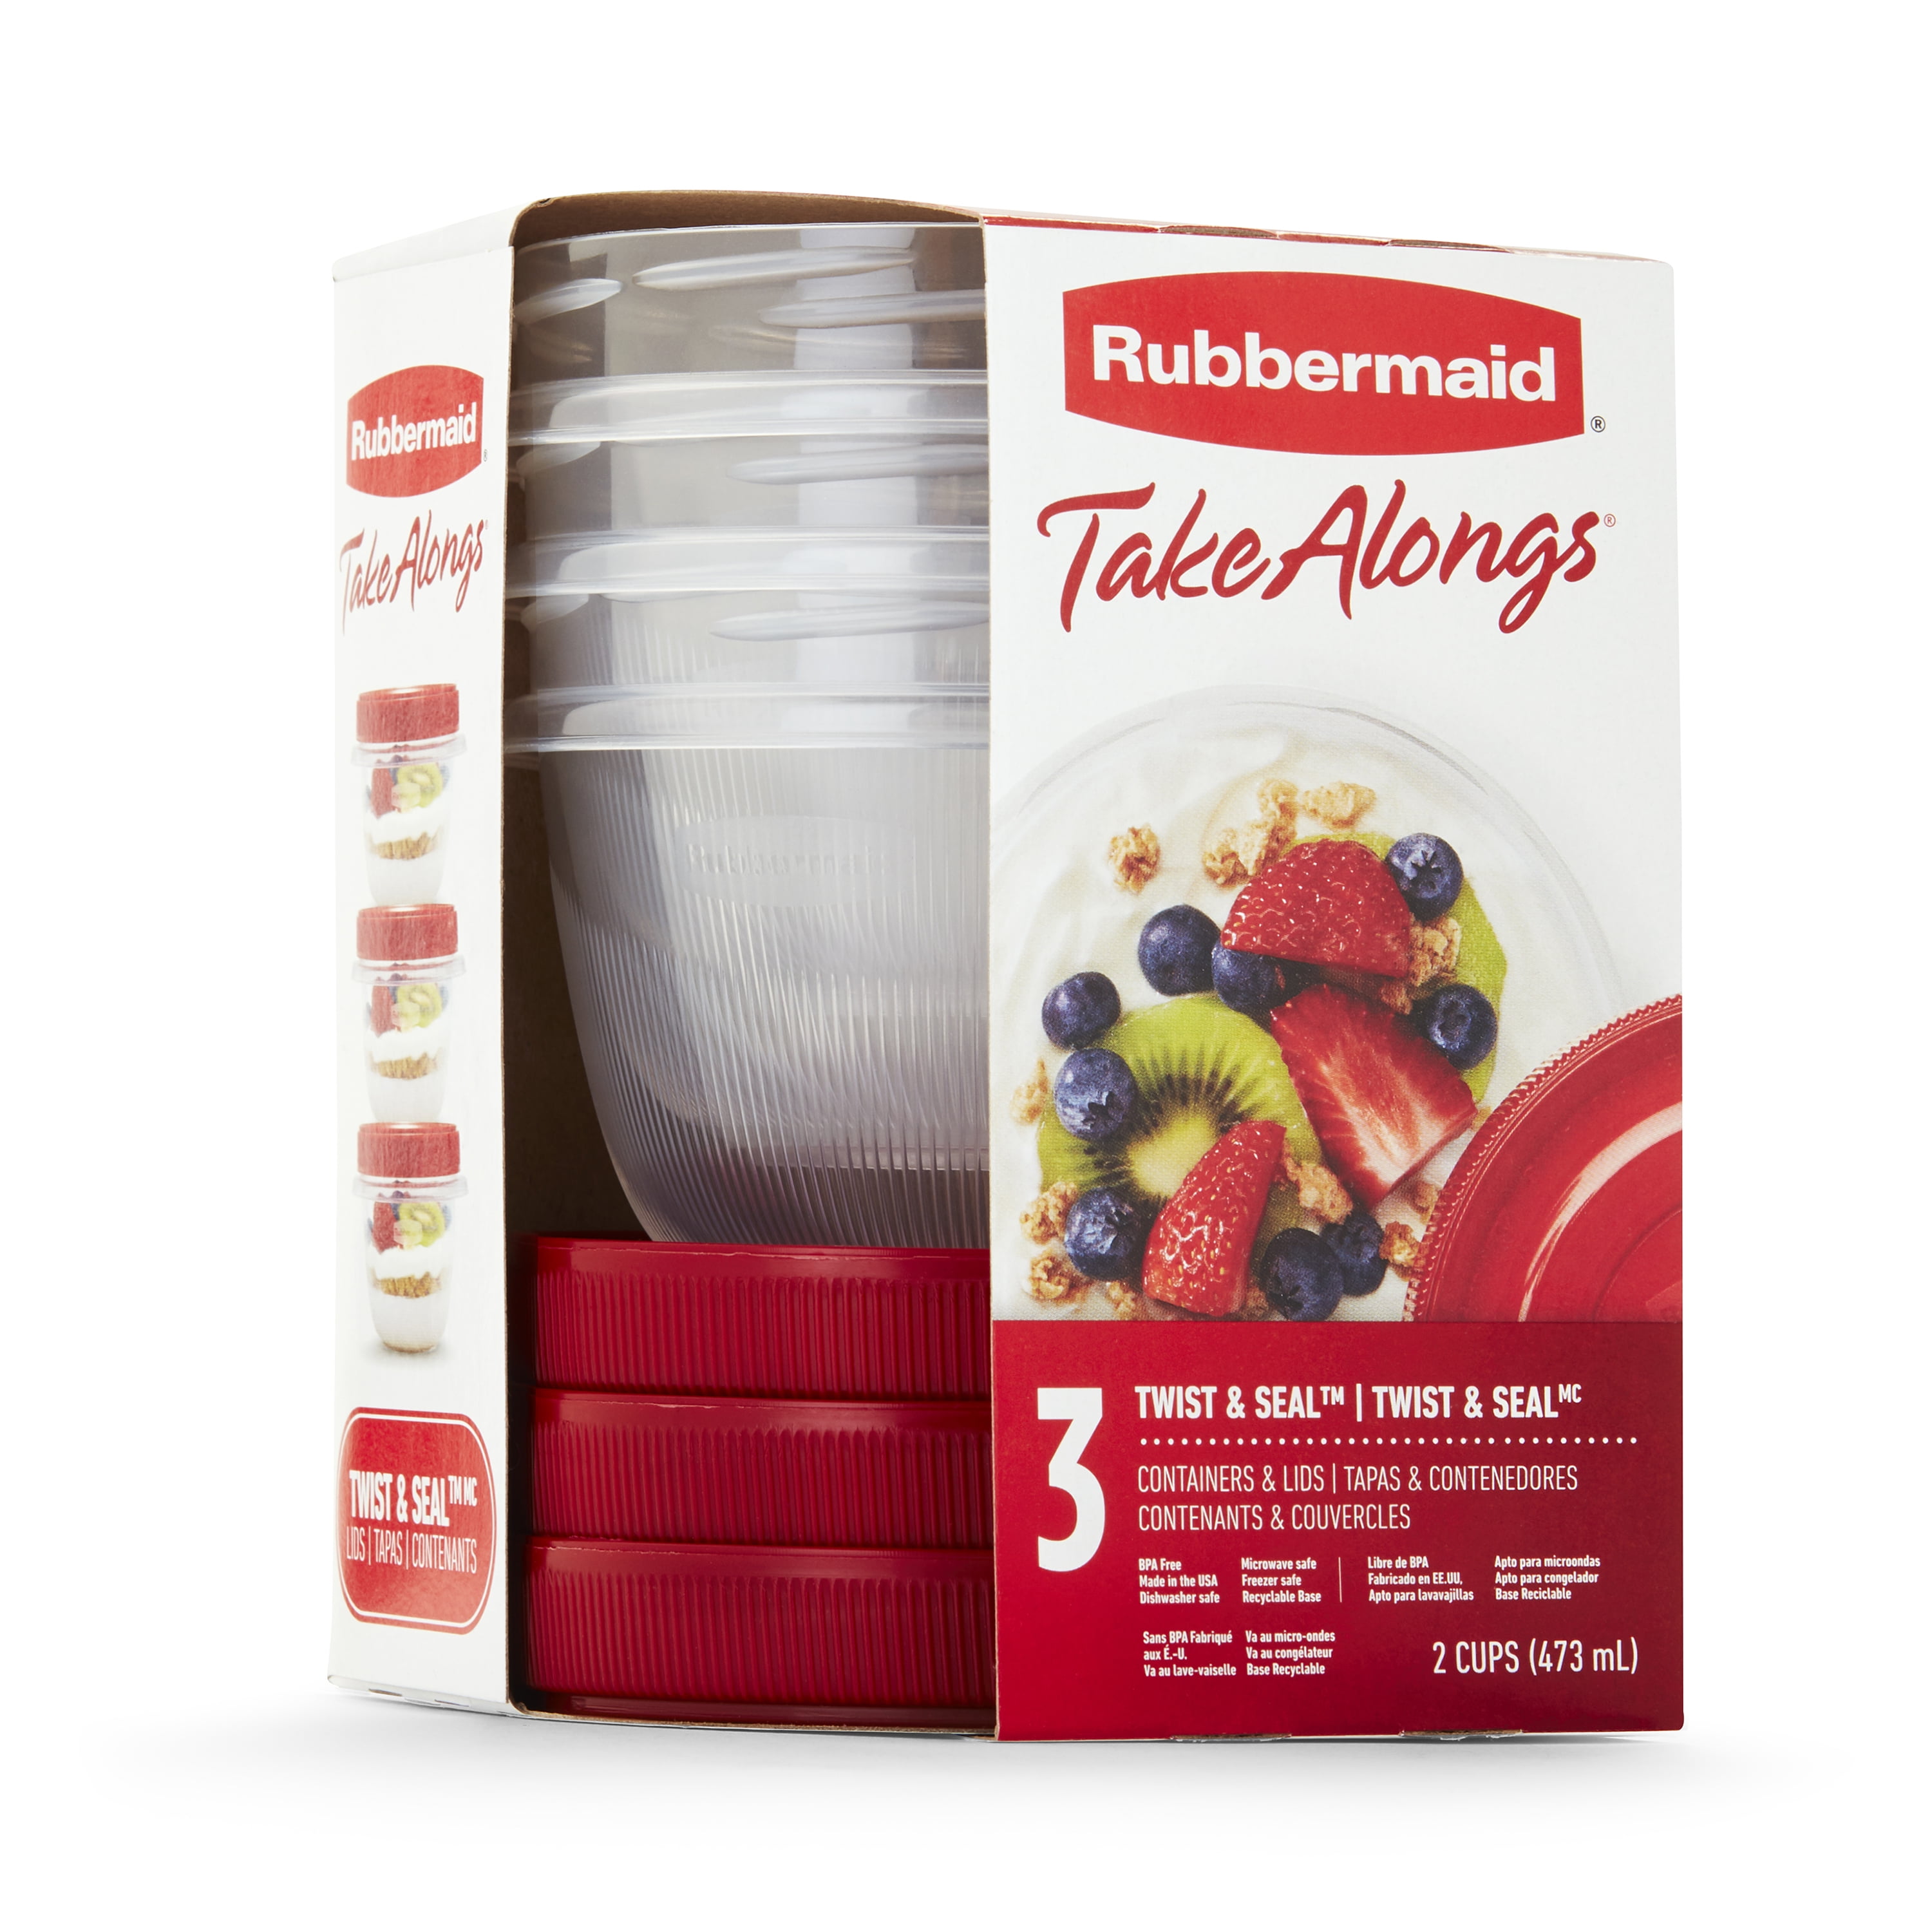 Set of two Rubbermaid liquid containers – 2 1/2 quarts and 1 1/2 quarts